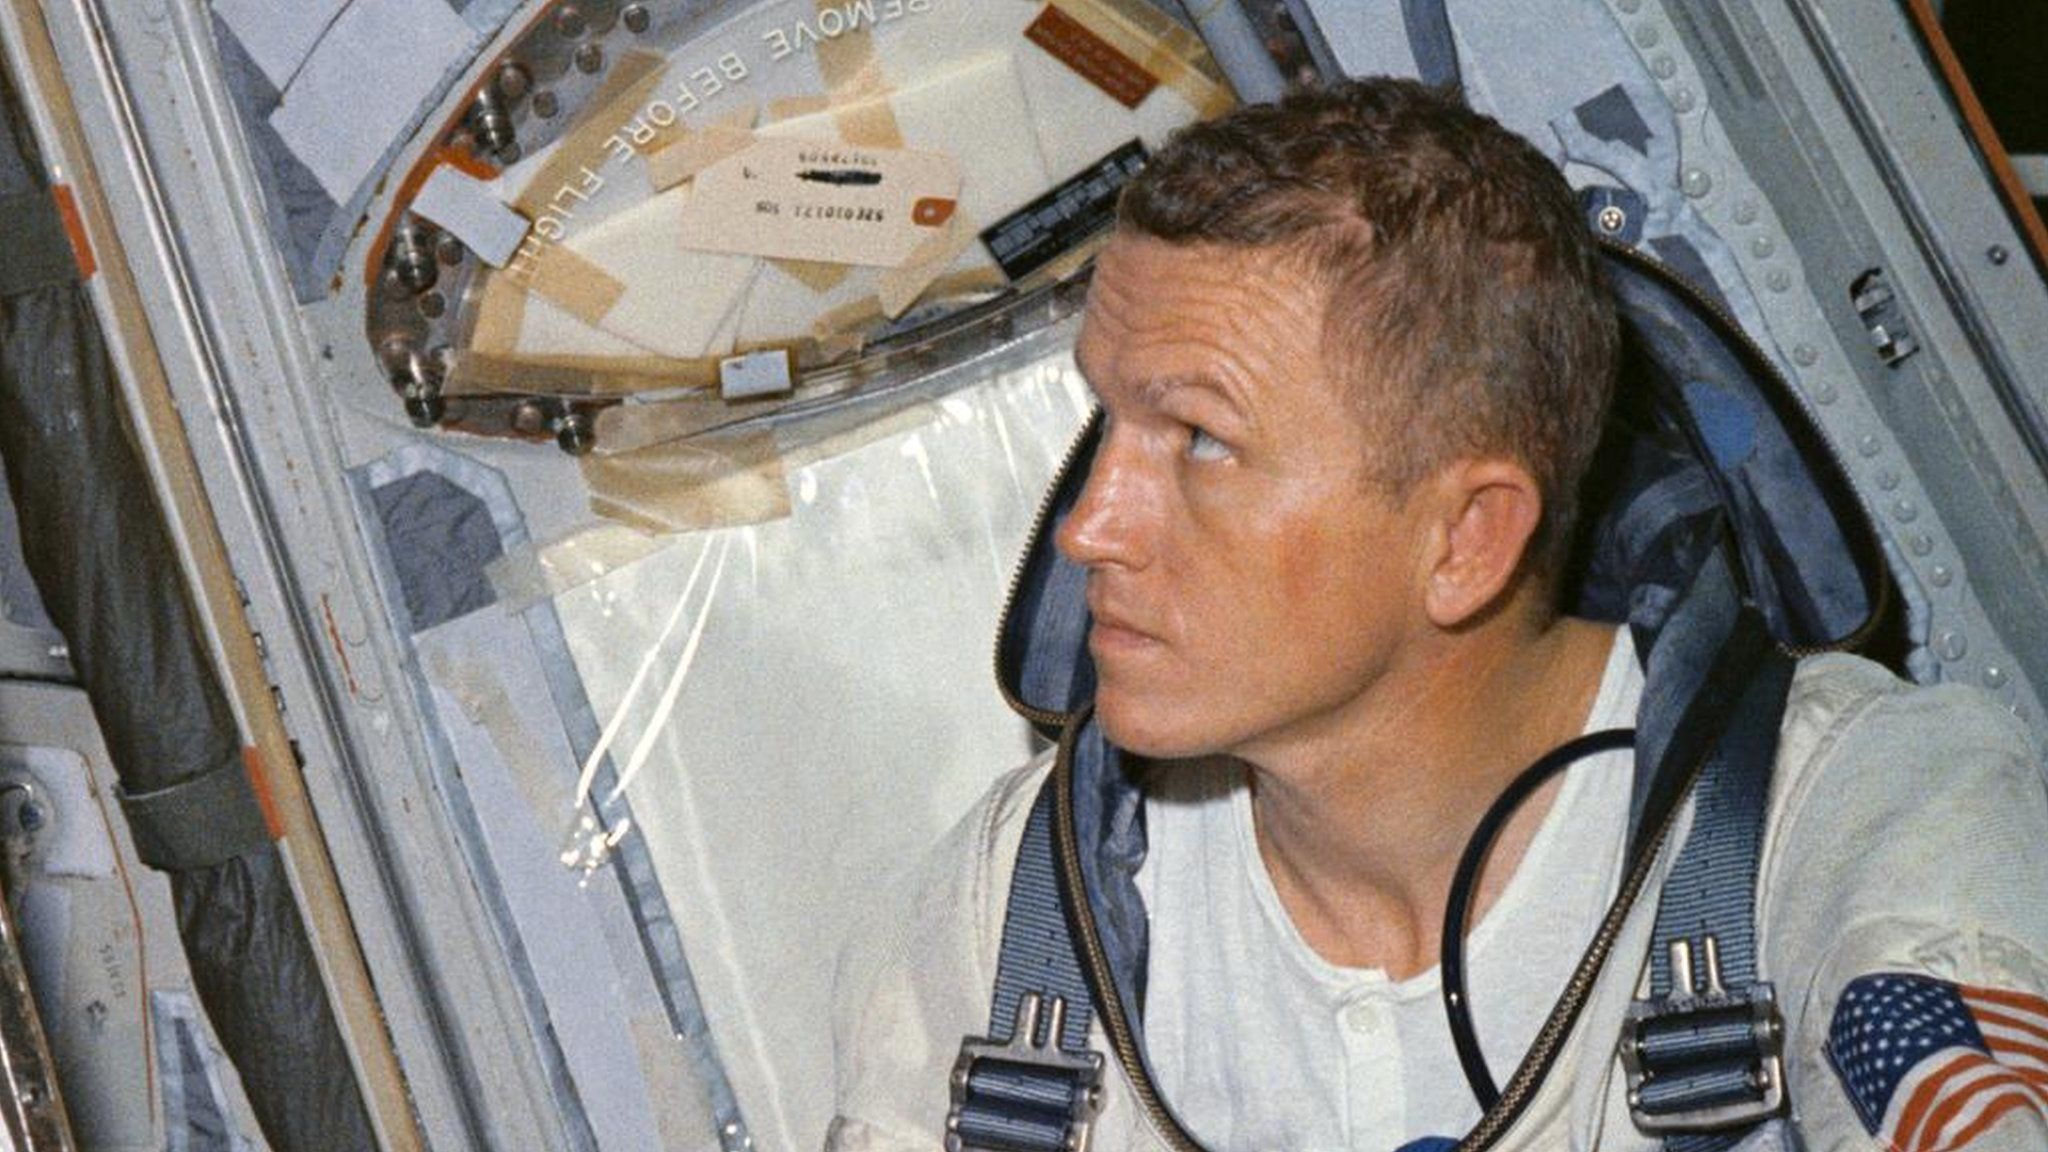 Frank Borman in spacecraft with a white tshirt